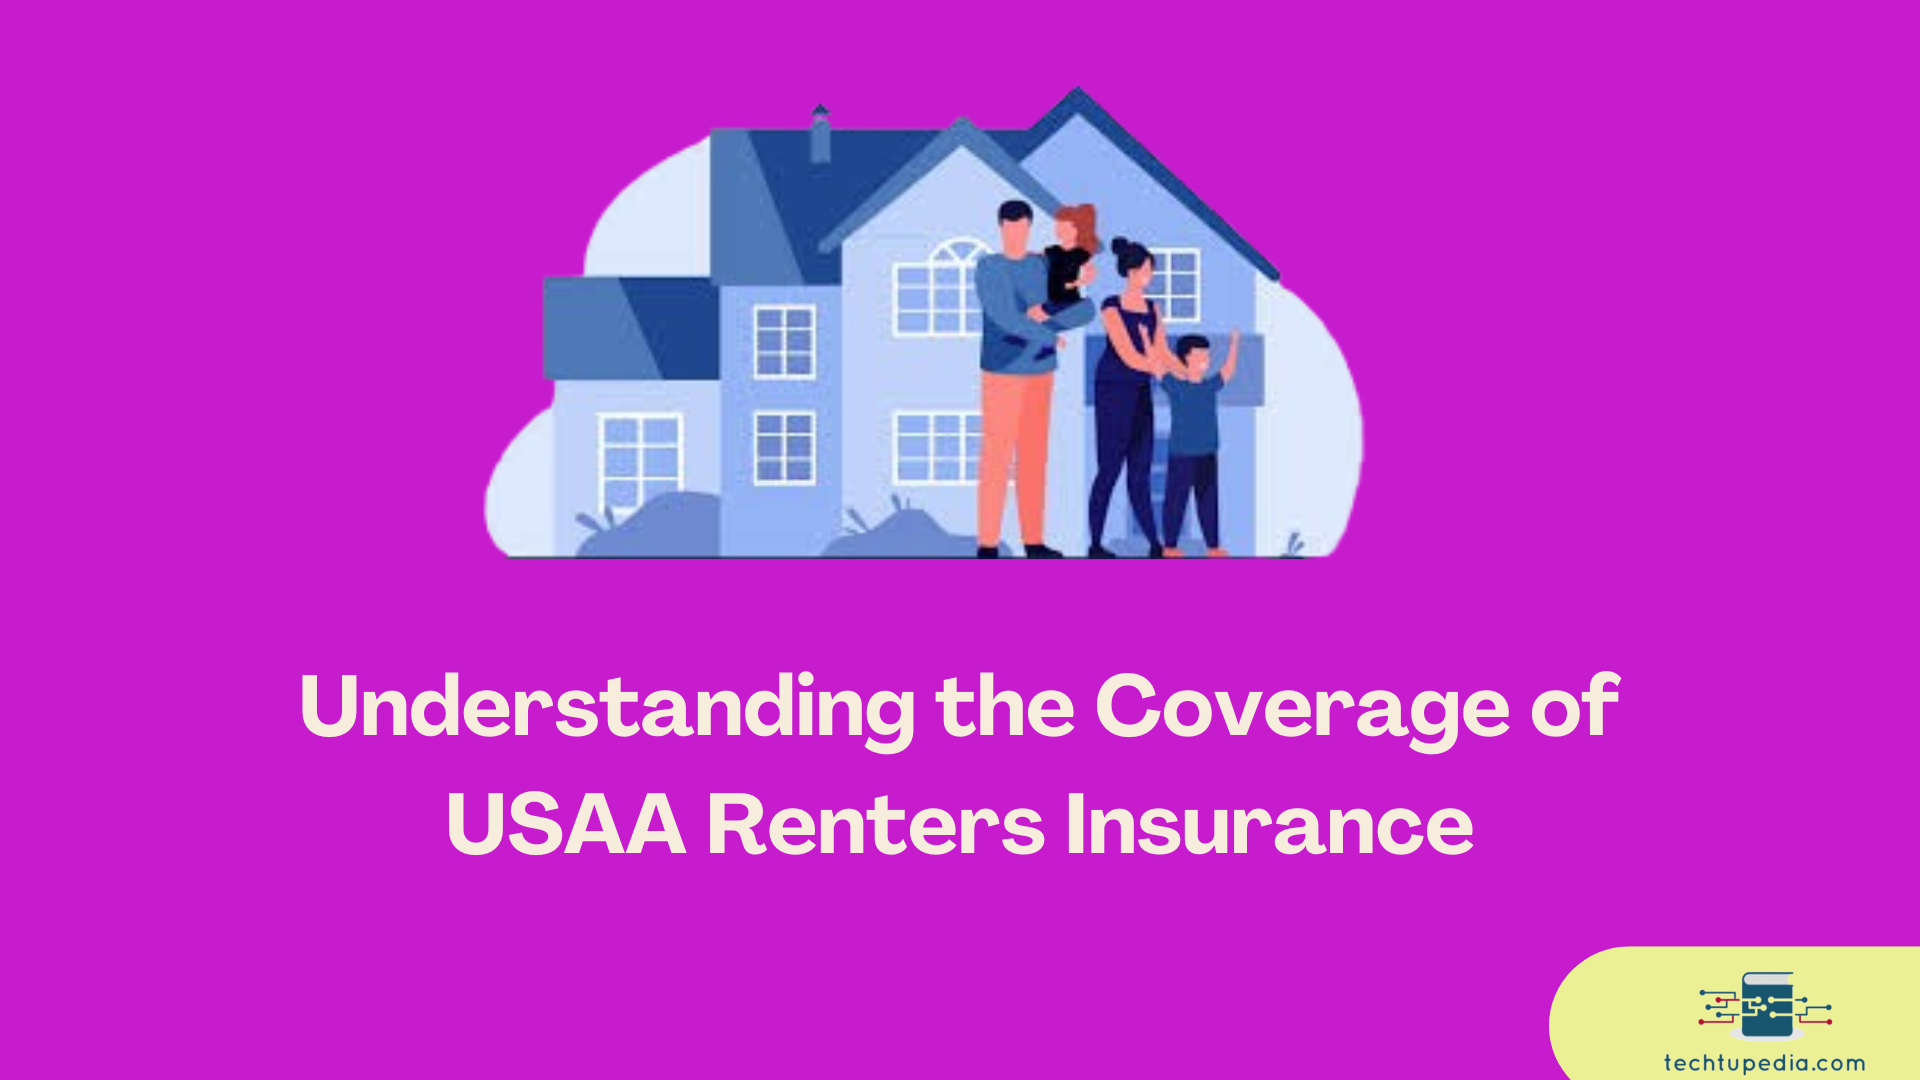 Understanding the Coverage of USAA Renters Insurance